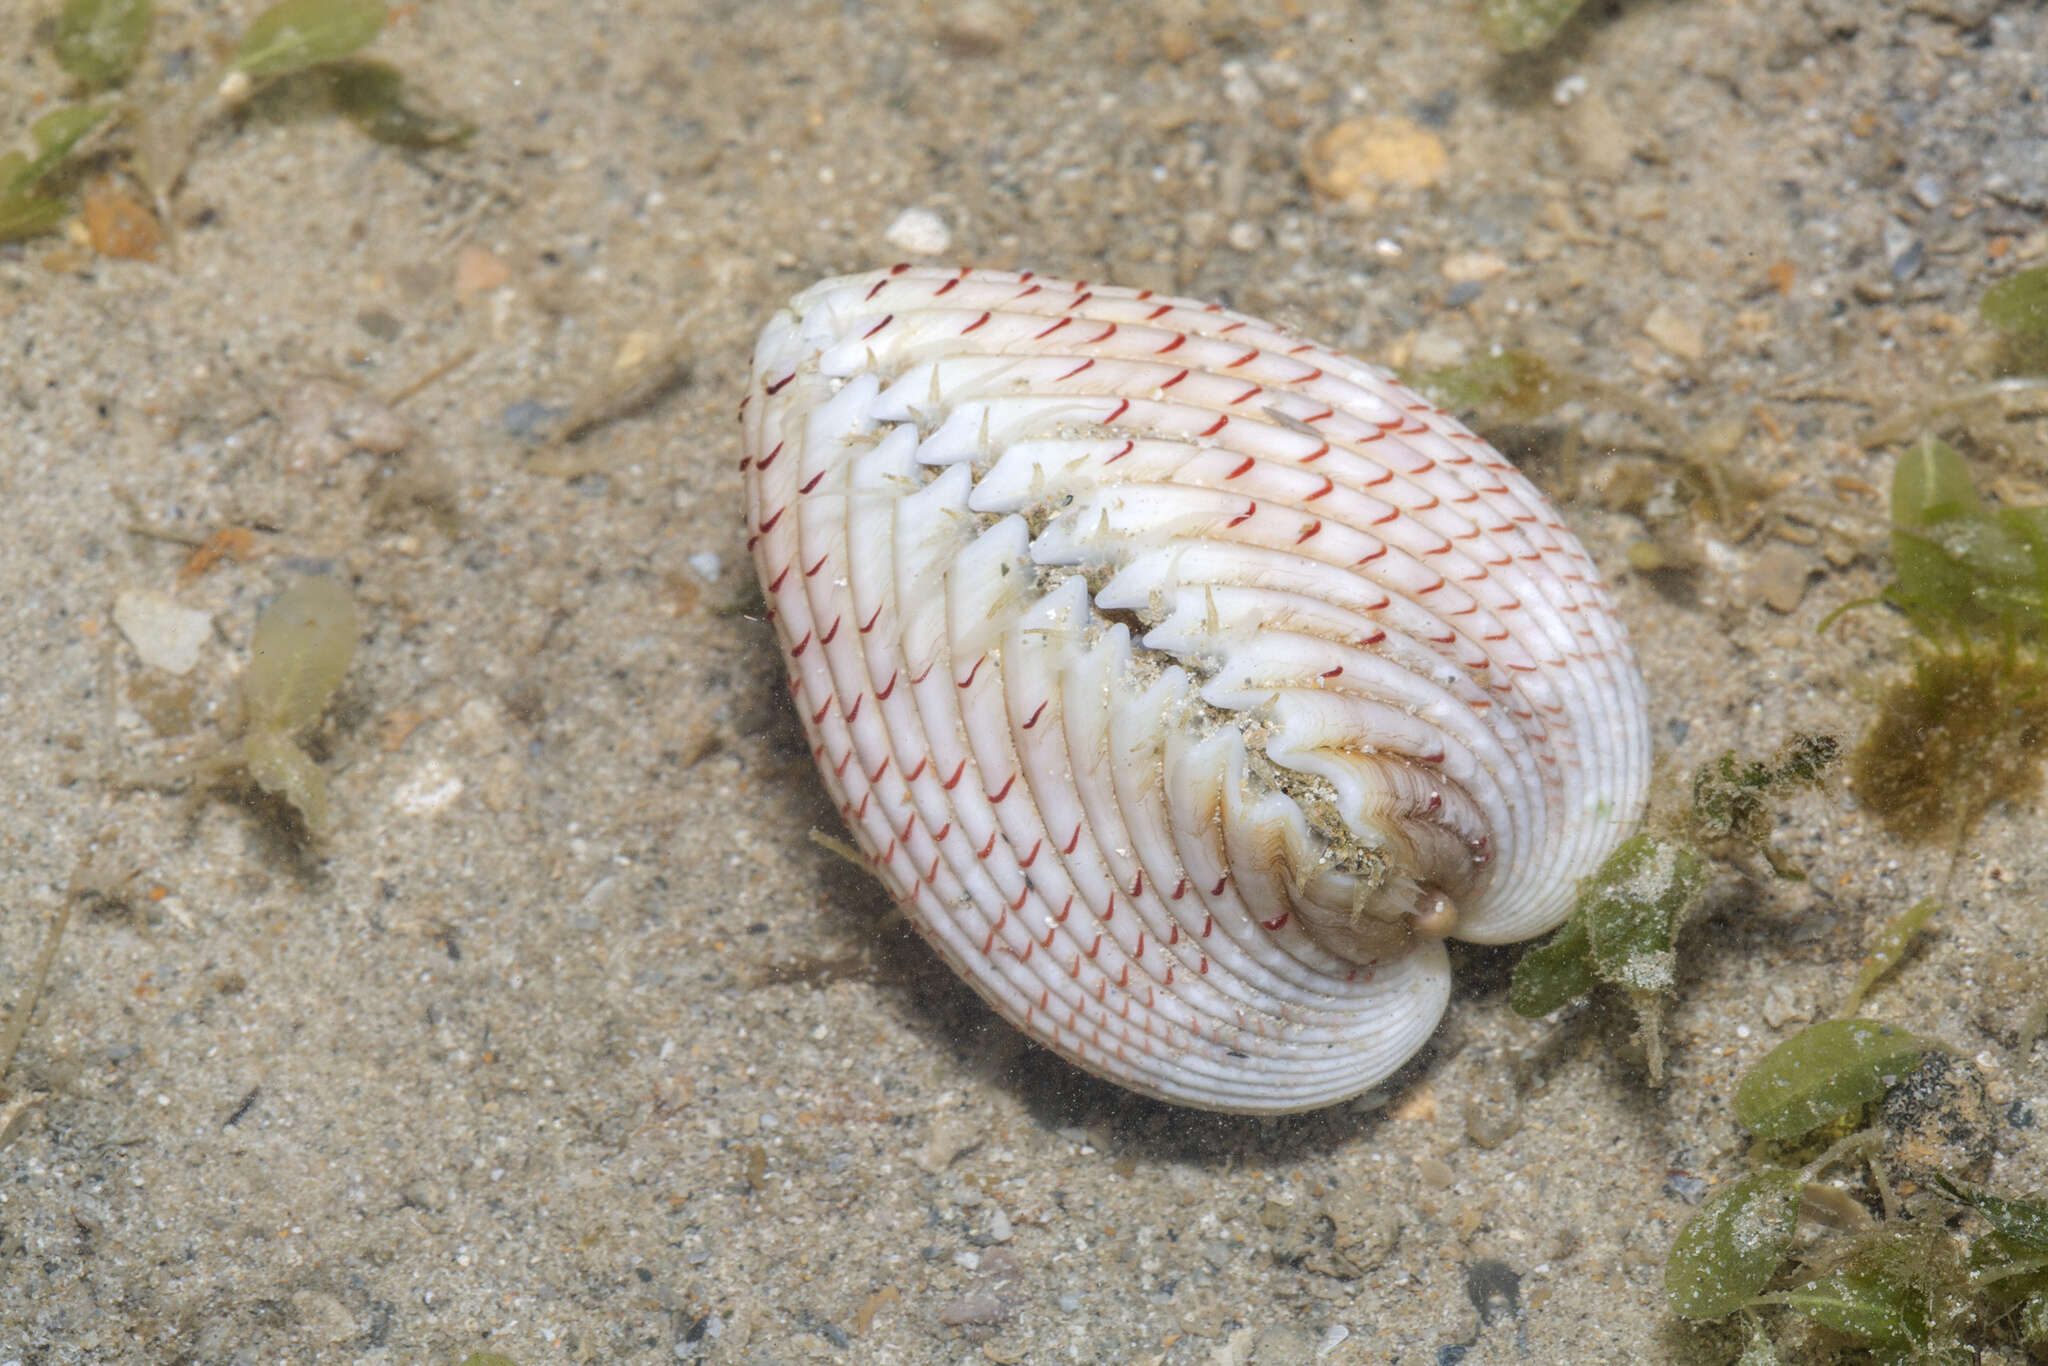 Image of strawberry cockle